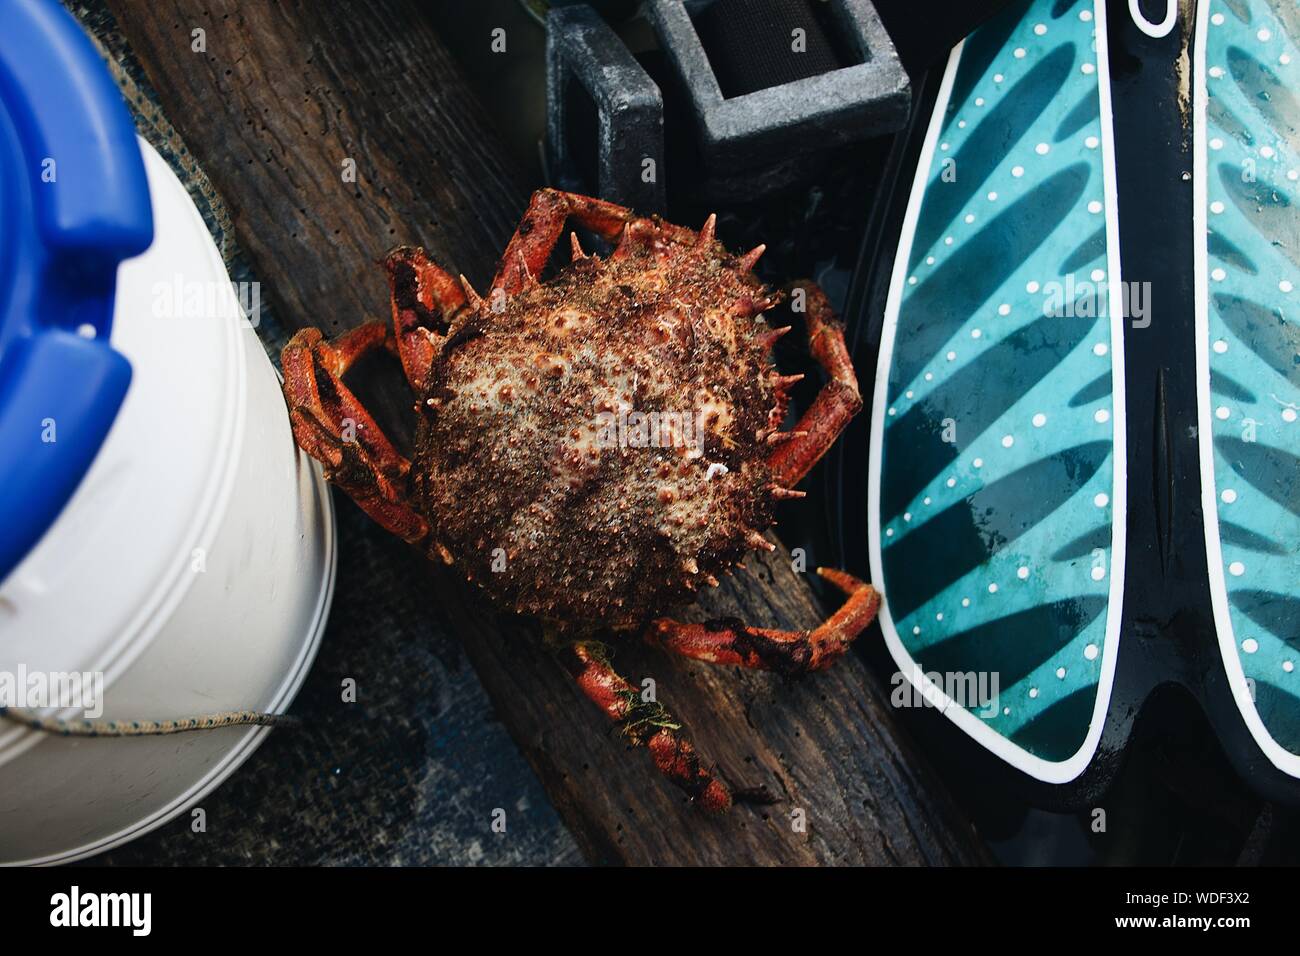 Closeup of a crab with a spiky shell on a wooden surface Stock Photo